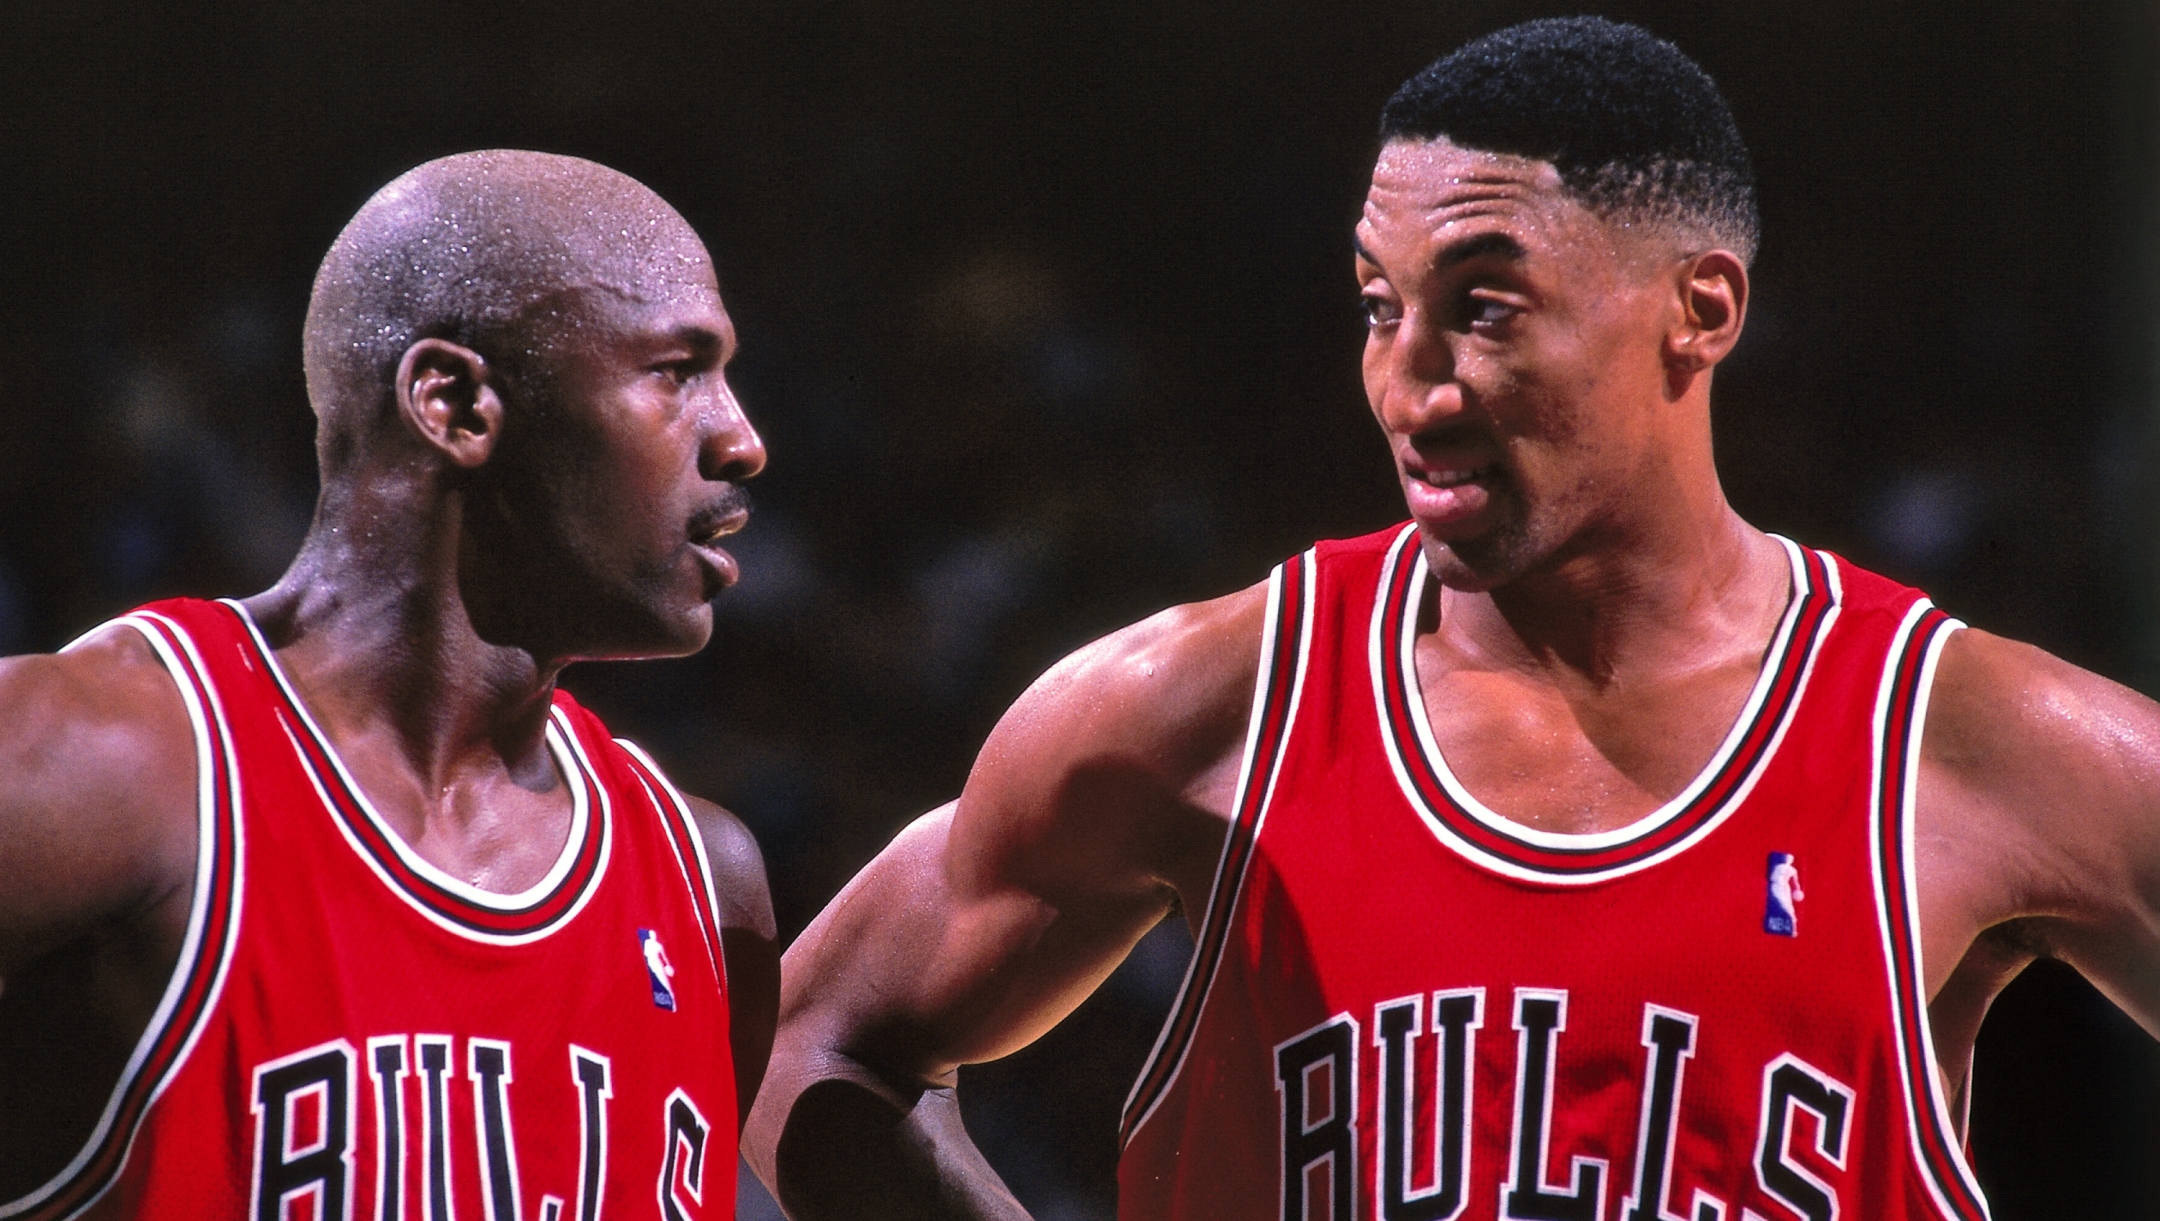 CHARLOTTE, NC - MAY 8: Michael Jordan #23 and Scottie Pippen #33 of the Chicago Bulls huddle together against the Charlotte Hornets on May 8, 1998 at Charlotte Coliseum in Charlotte, North Carolina. NOTE TO USER: User expressly acknowledges and agrees that, by downloading and or using this photograph, User is consenting to the terms and conditions of the Getty Images License Agreement. Mandatory Copyright Notice: Copyright 1998 NBAE   Kent Smith/NBAE via Getty Images/AFP (Photo by Kent Smith / NBAE / Getty Images / Getty Images via AFP)